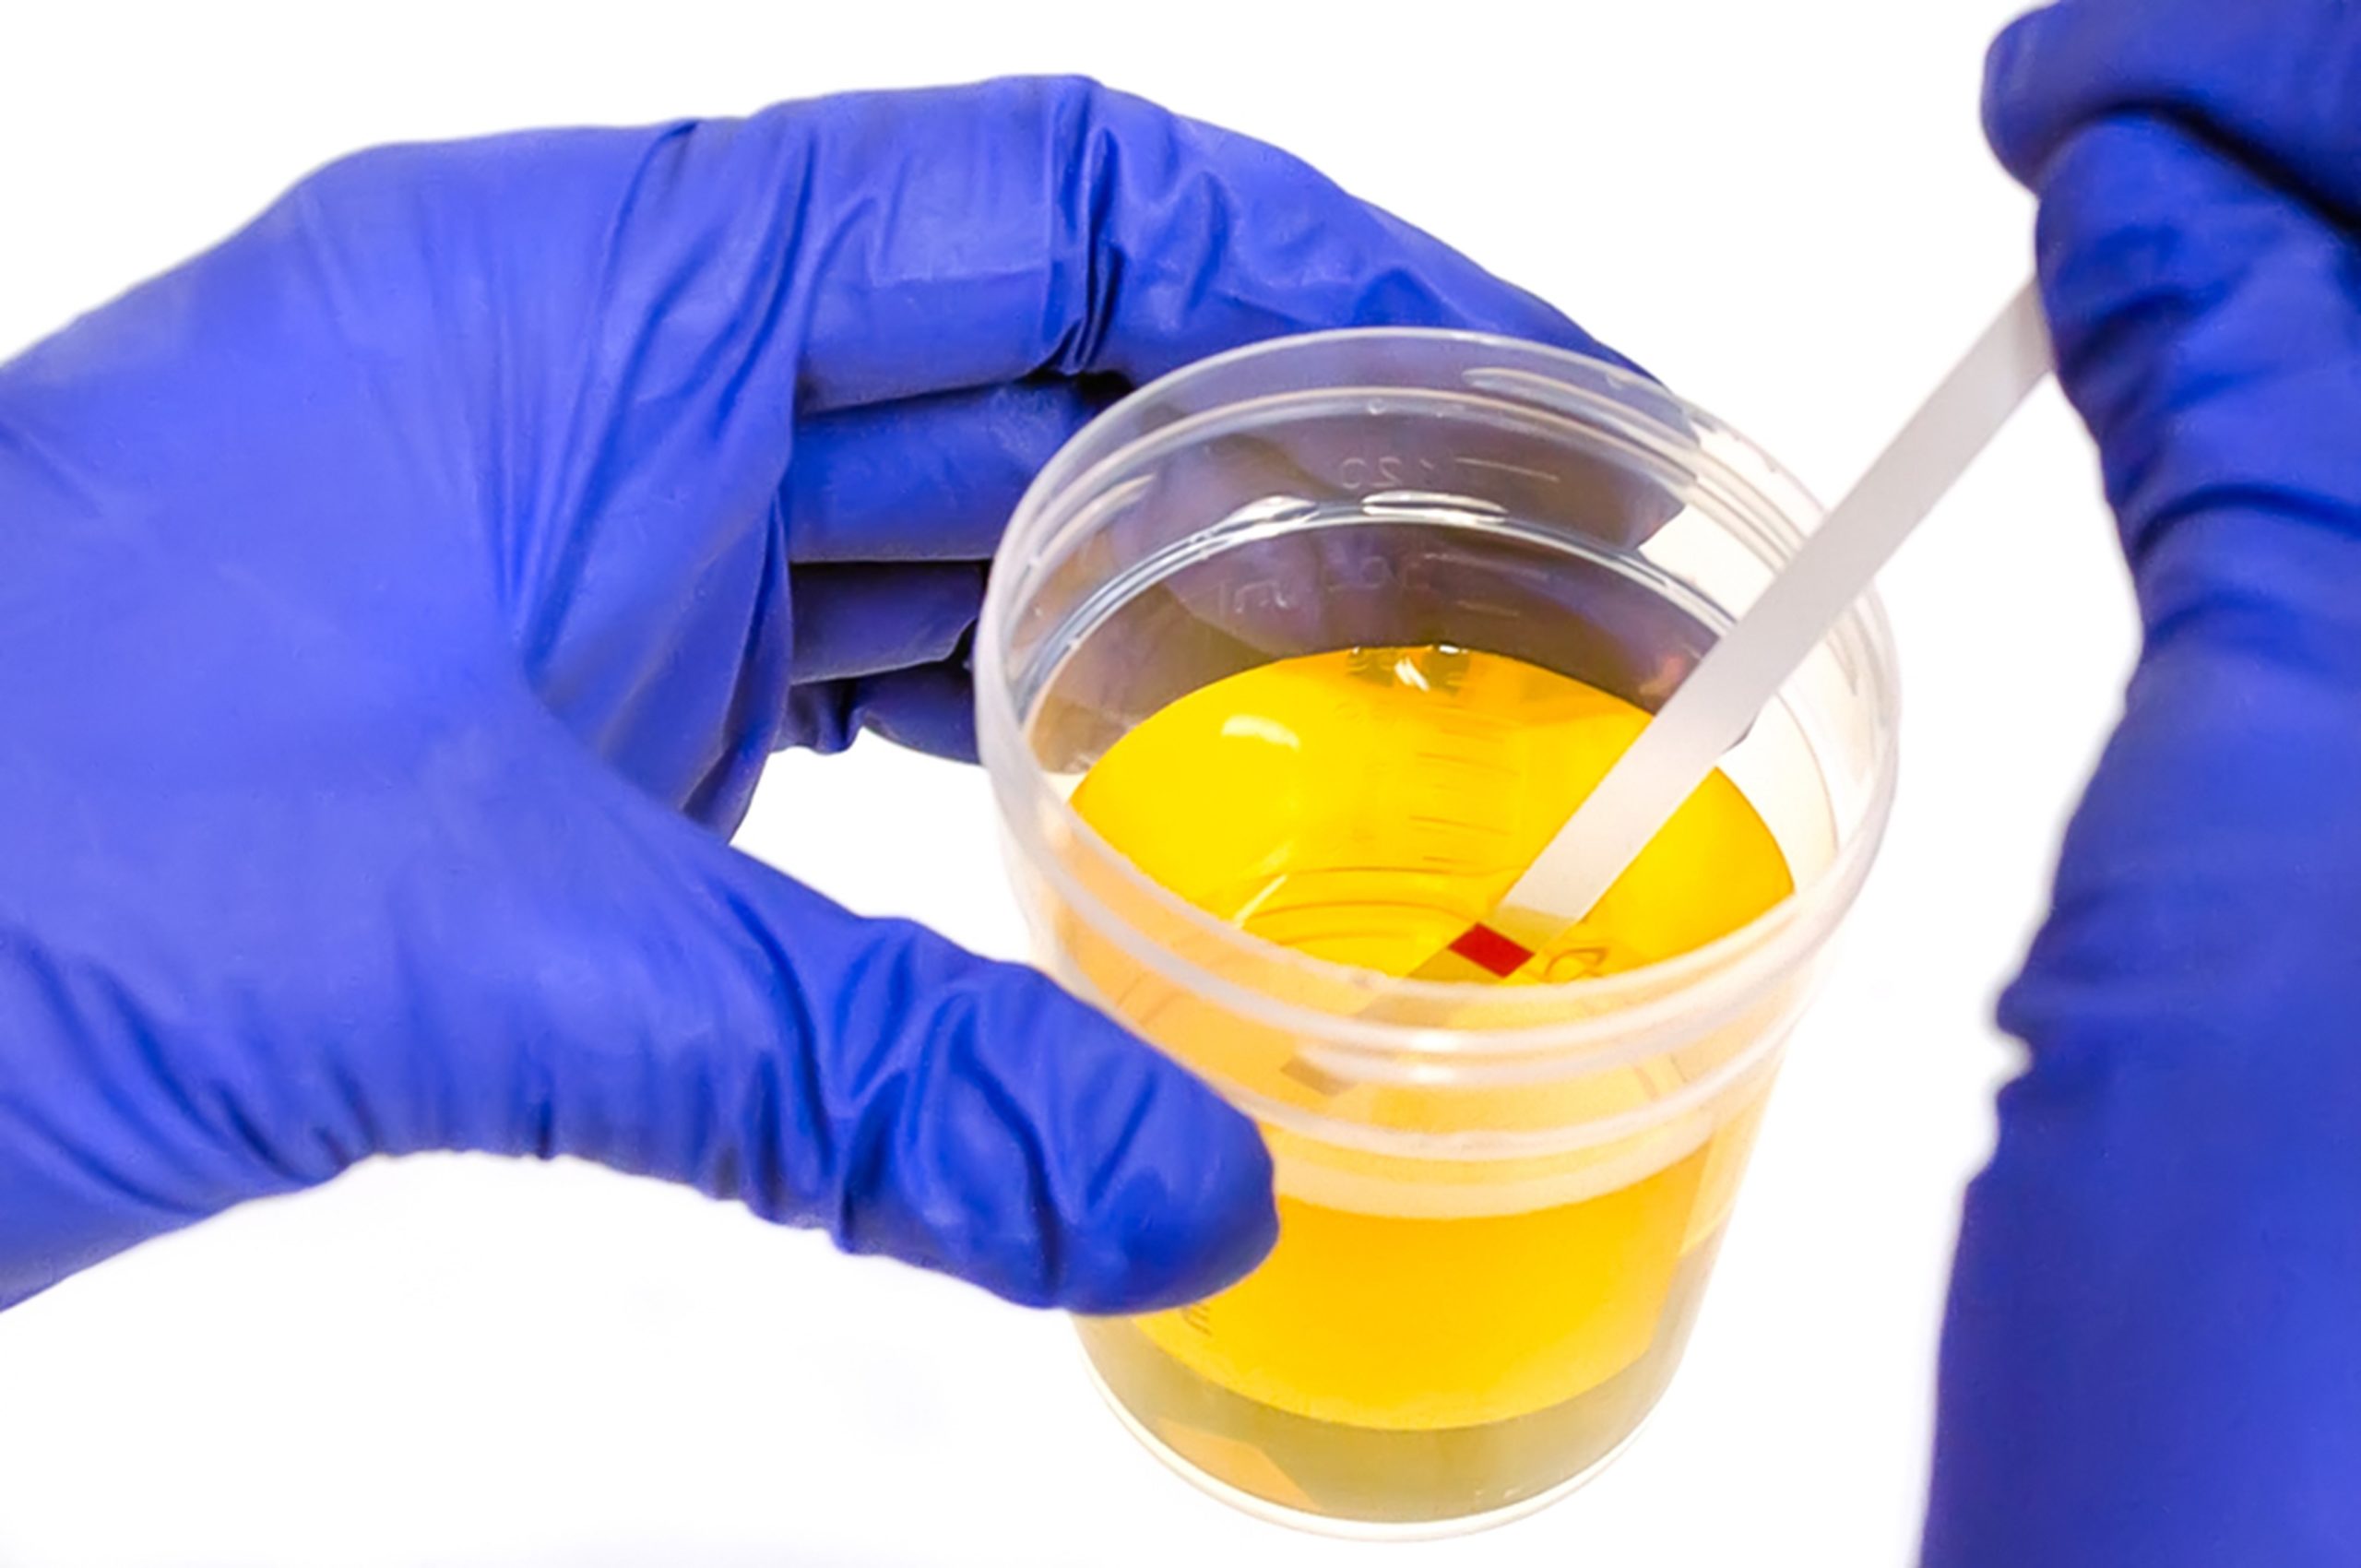 Gloved hands holding inserting a testing strip into a jarred urine sample.